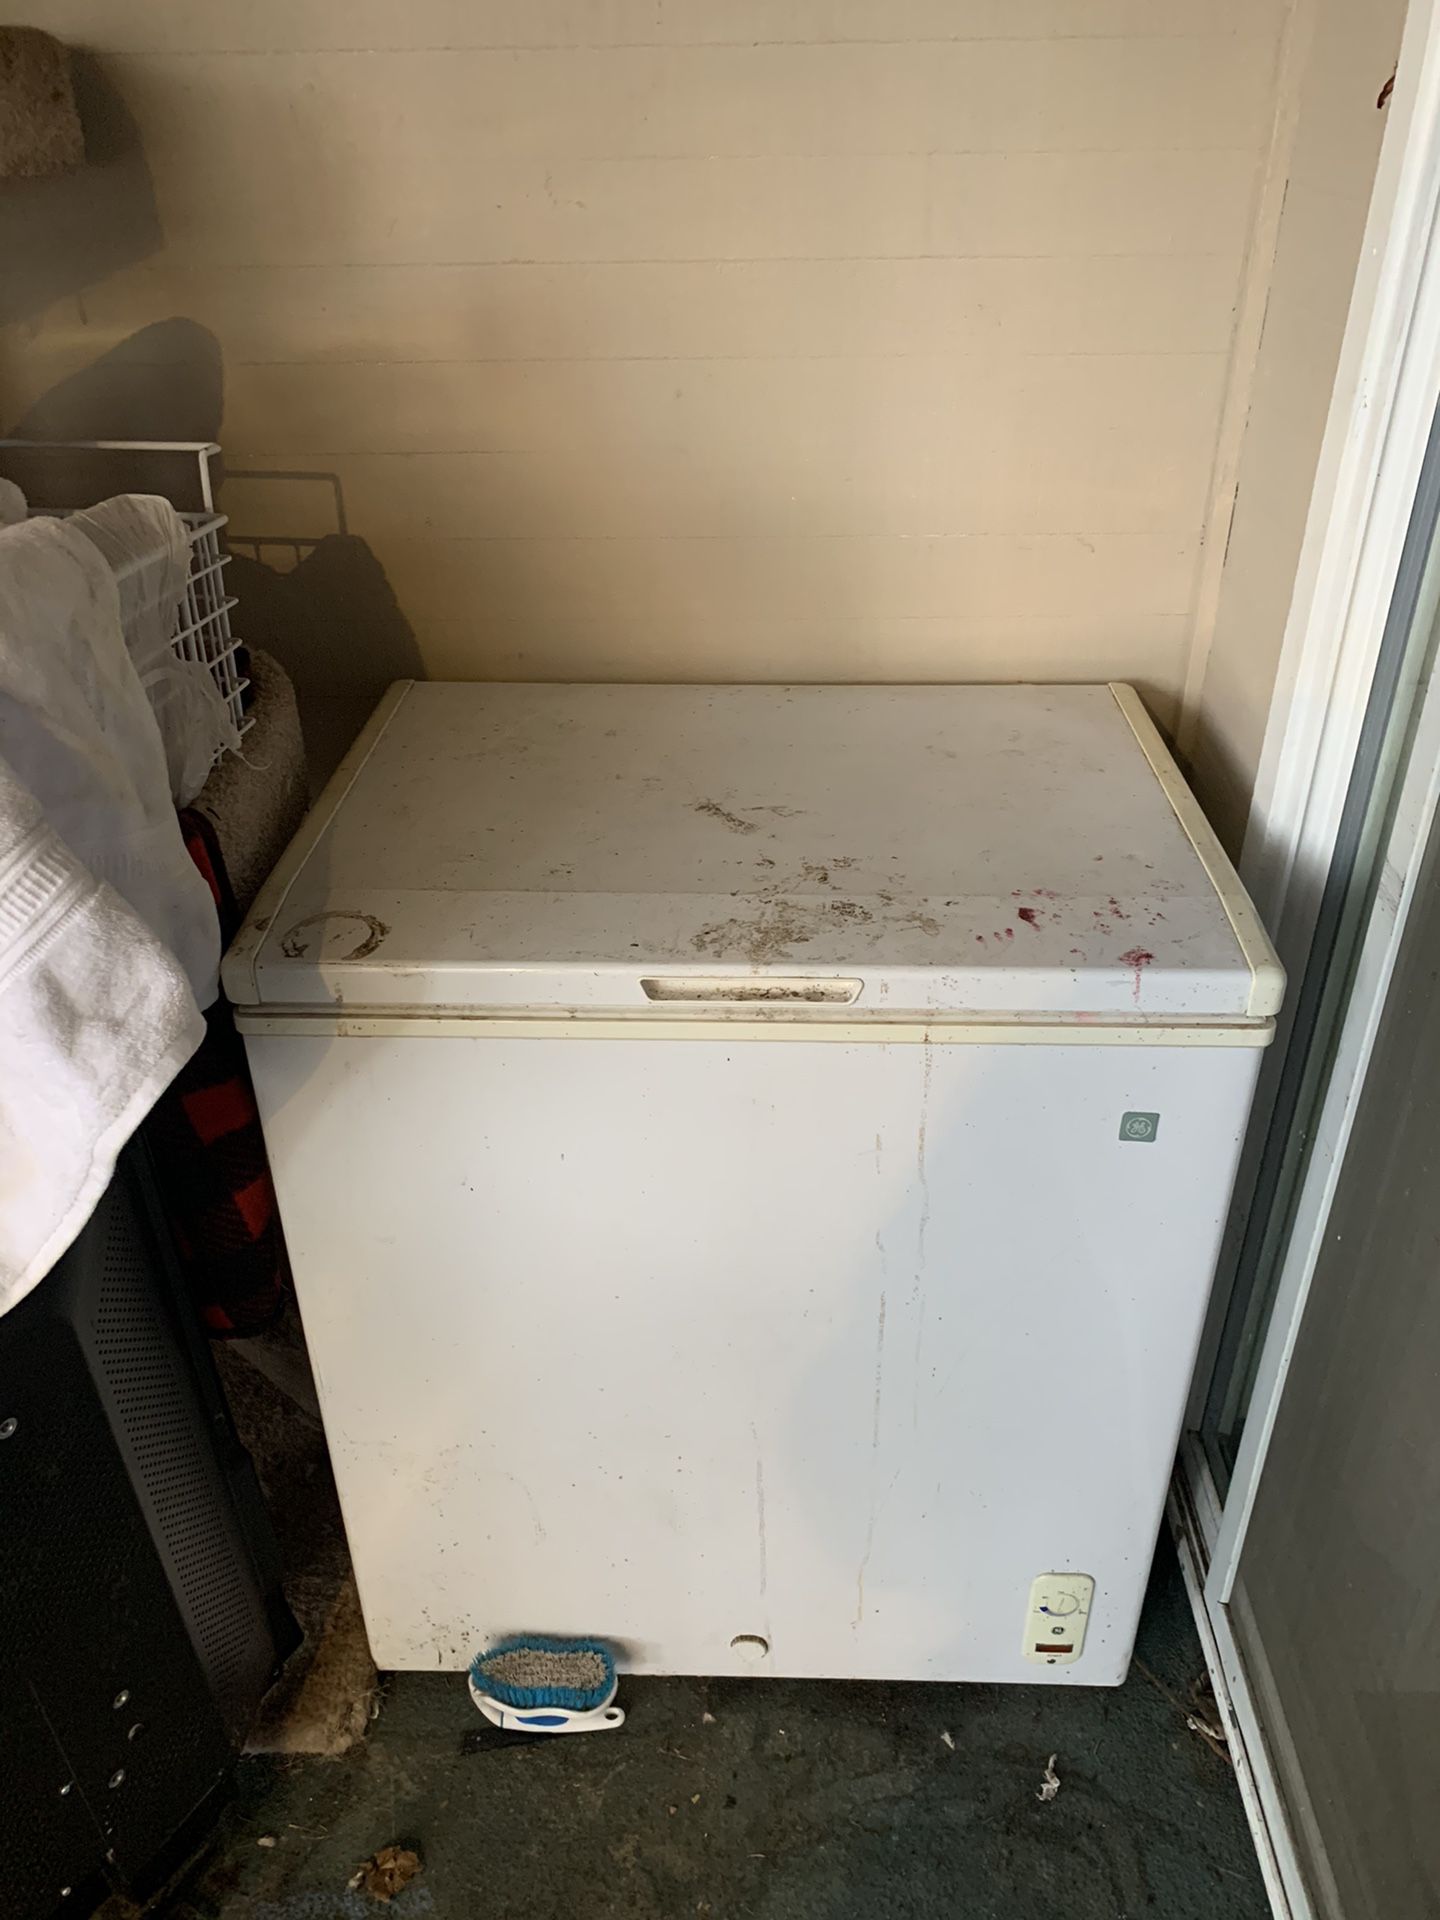 Maytag chest freezer. 1 year old works perfect.